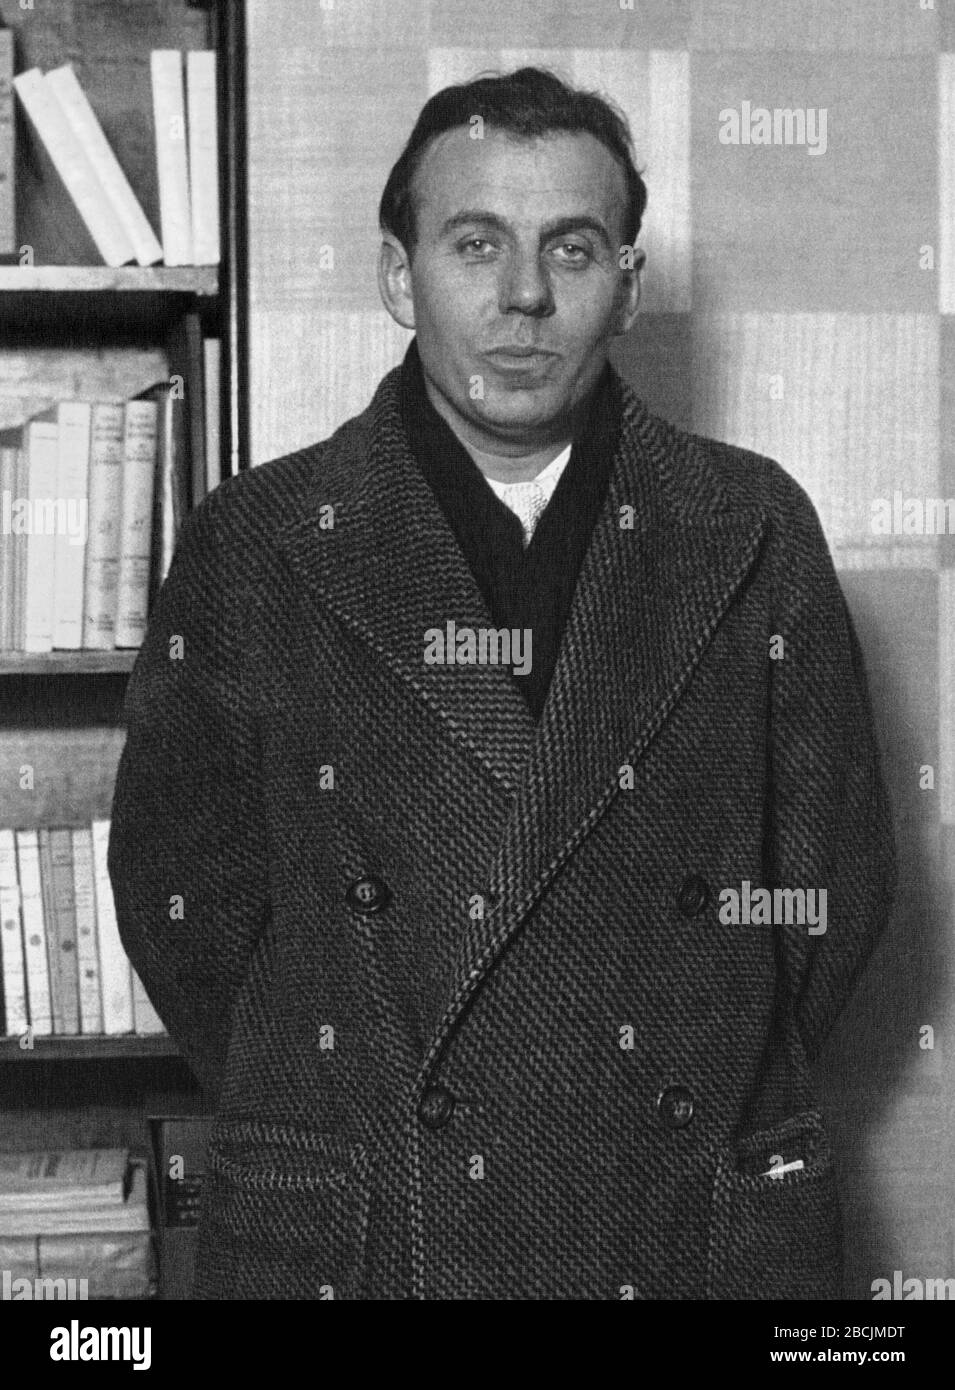 'Français : Louis-Ferdinand Céline (1886-1958), écrivain français en 1932, année où il obtint le prix Renaudot pour son roman Le Voyage au bout de la nuit. (Épreuve recadrée 2.) English: FLouis-Ferdinand Céline (1886-1958), French writer in 1932, the year he won the Renaudot prize for his novel Journey to the End of the Night. (Cropped print 2.); 1932. 2013-08-12 for upload; This image comes from Gallica Digital Library and is available under the digital ID btv1b9046059w/f1 This tag does not indicate the copyright status of the attached work. A normal copyright tag is still required. See Commo Stock Photo